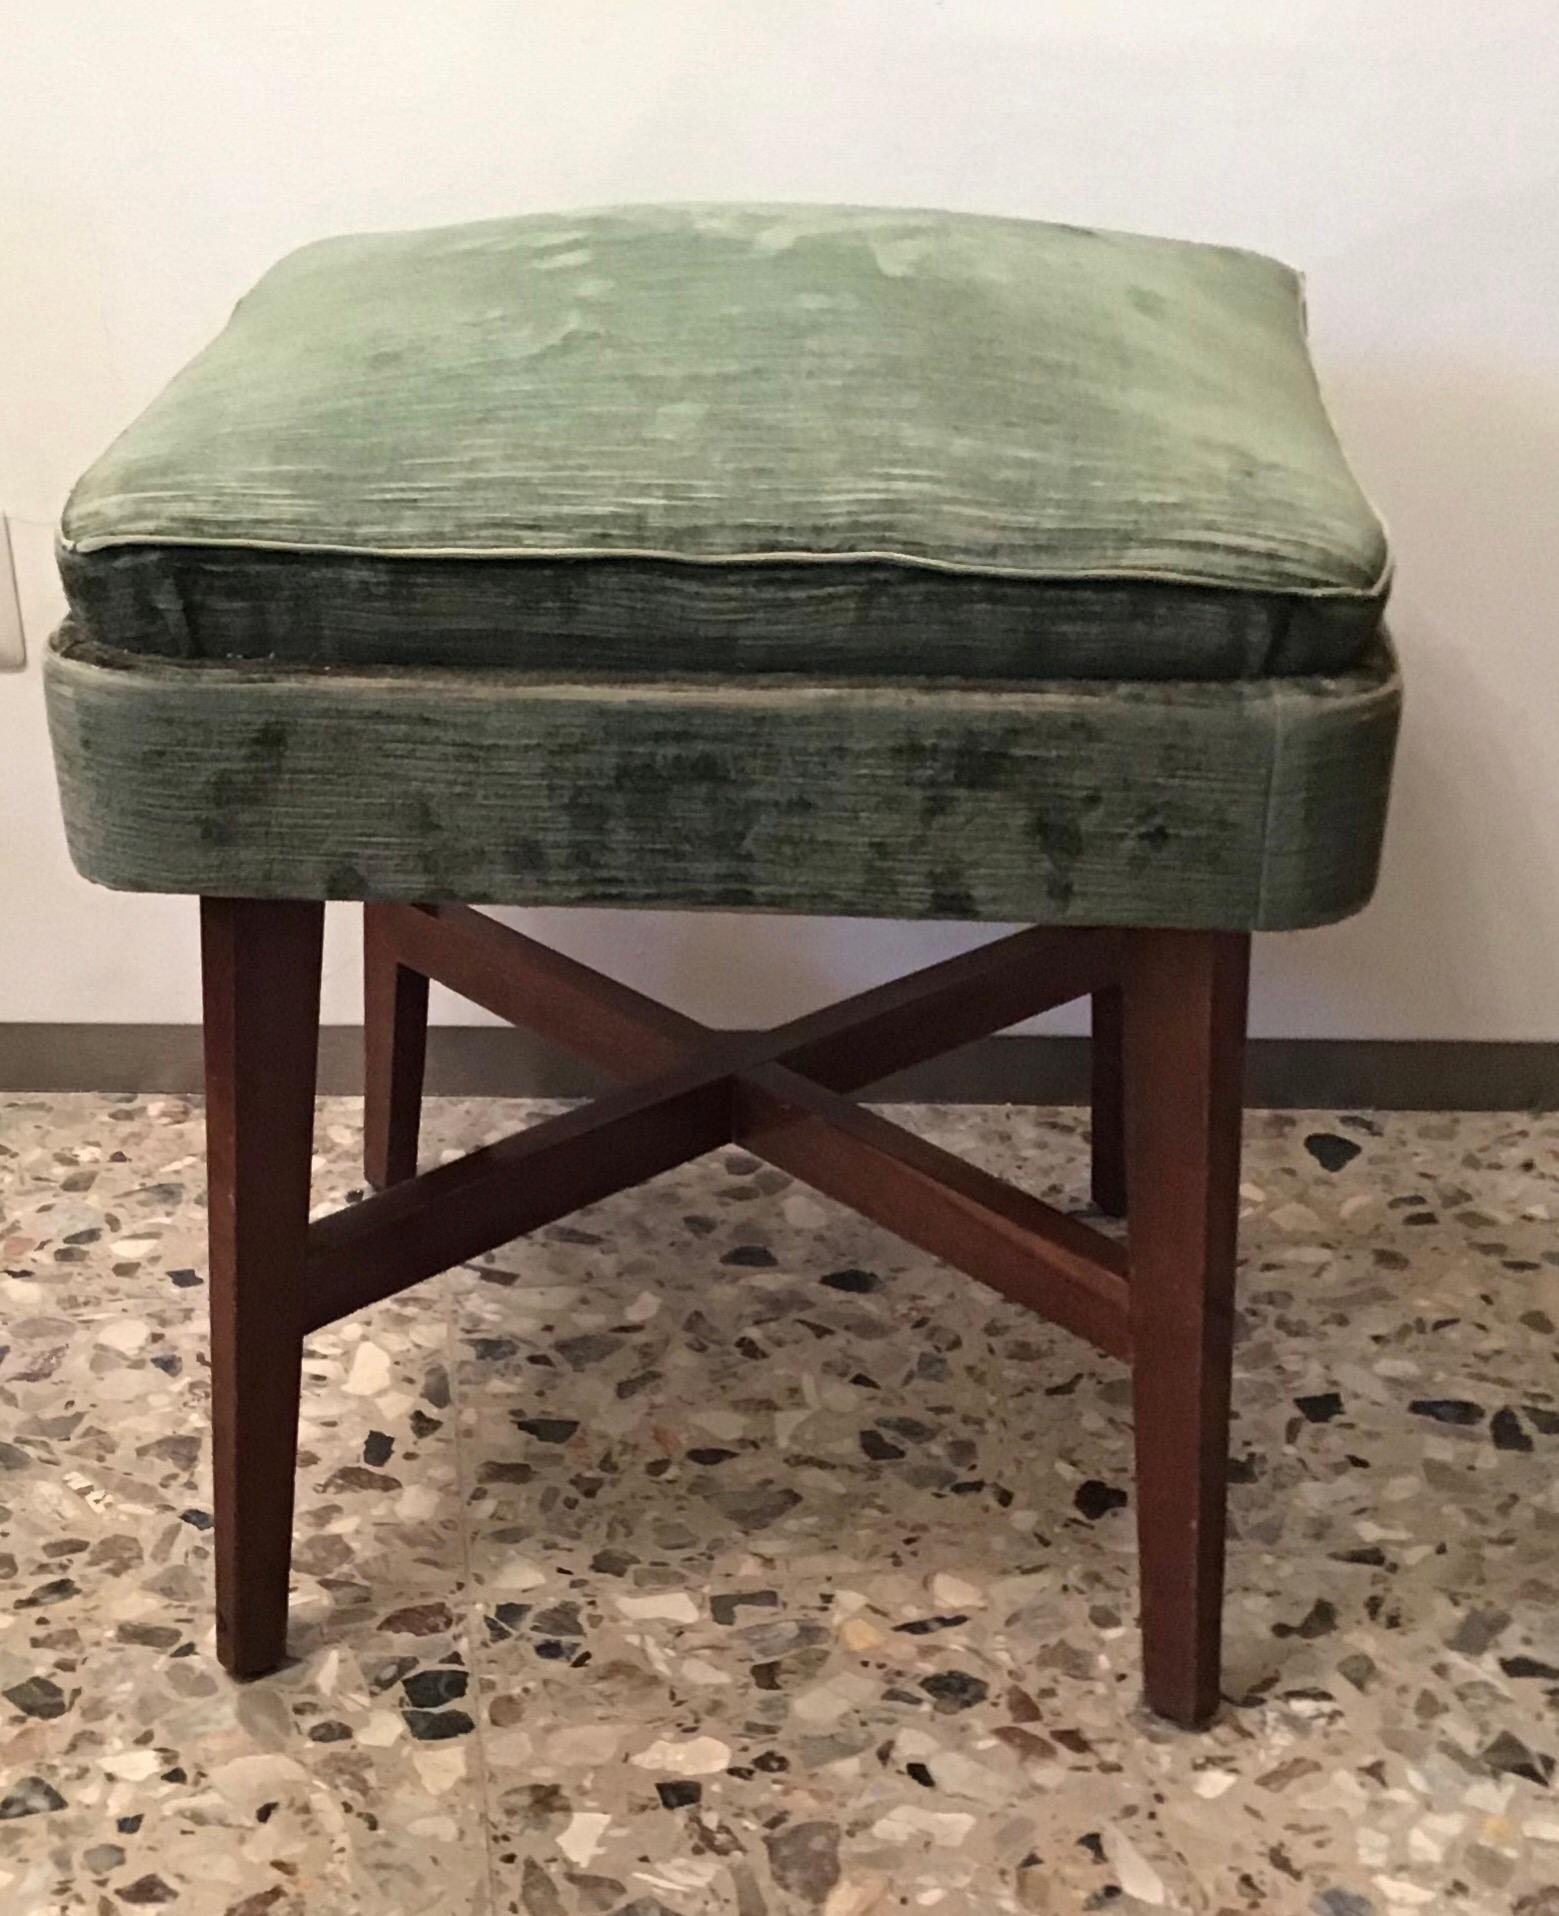 Gio Ponti “Stile” Pair of Benches /Stools Wood Seat Wood Velvet, 1950, Italy For Sale 4